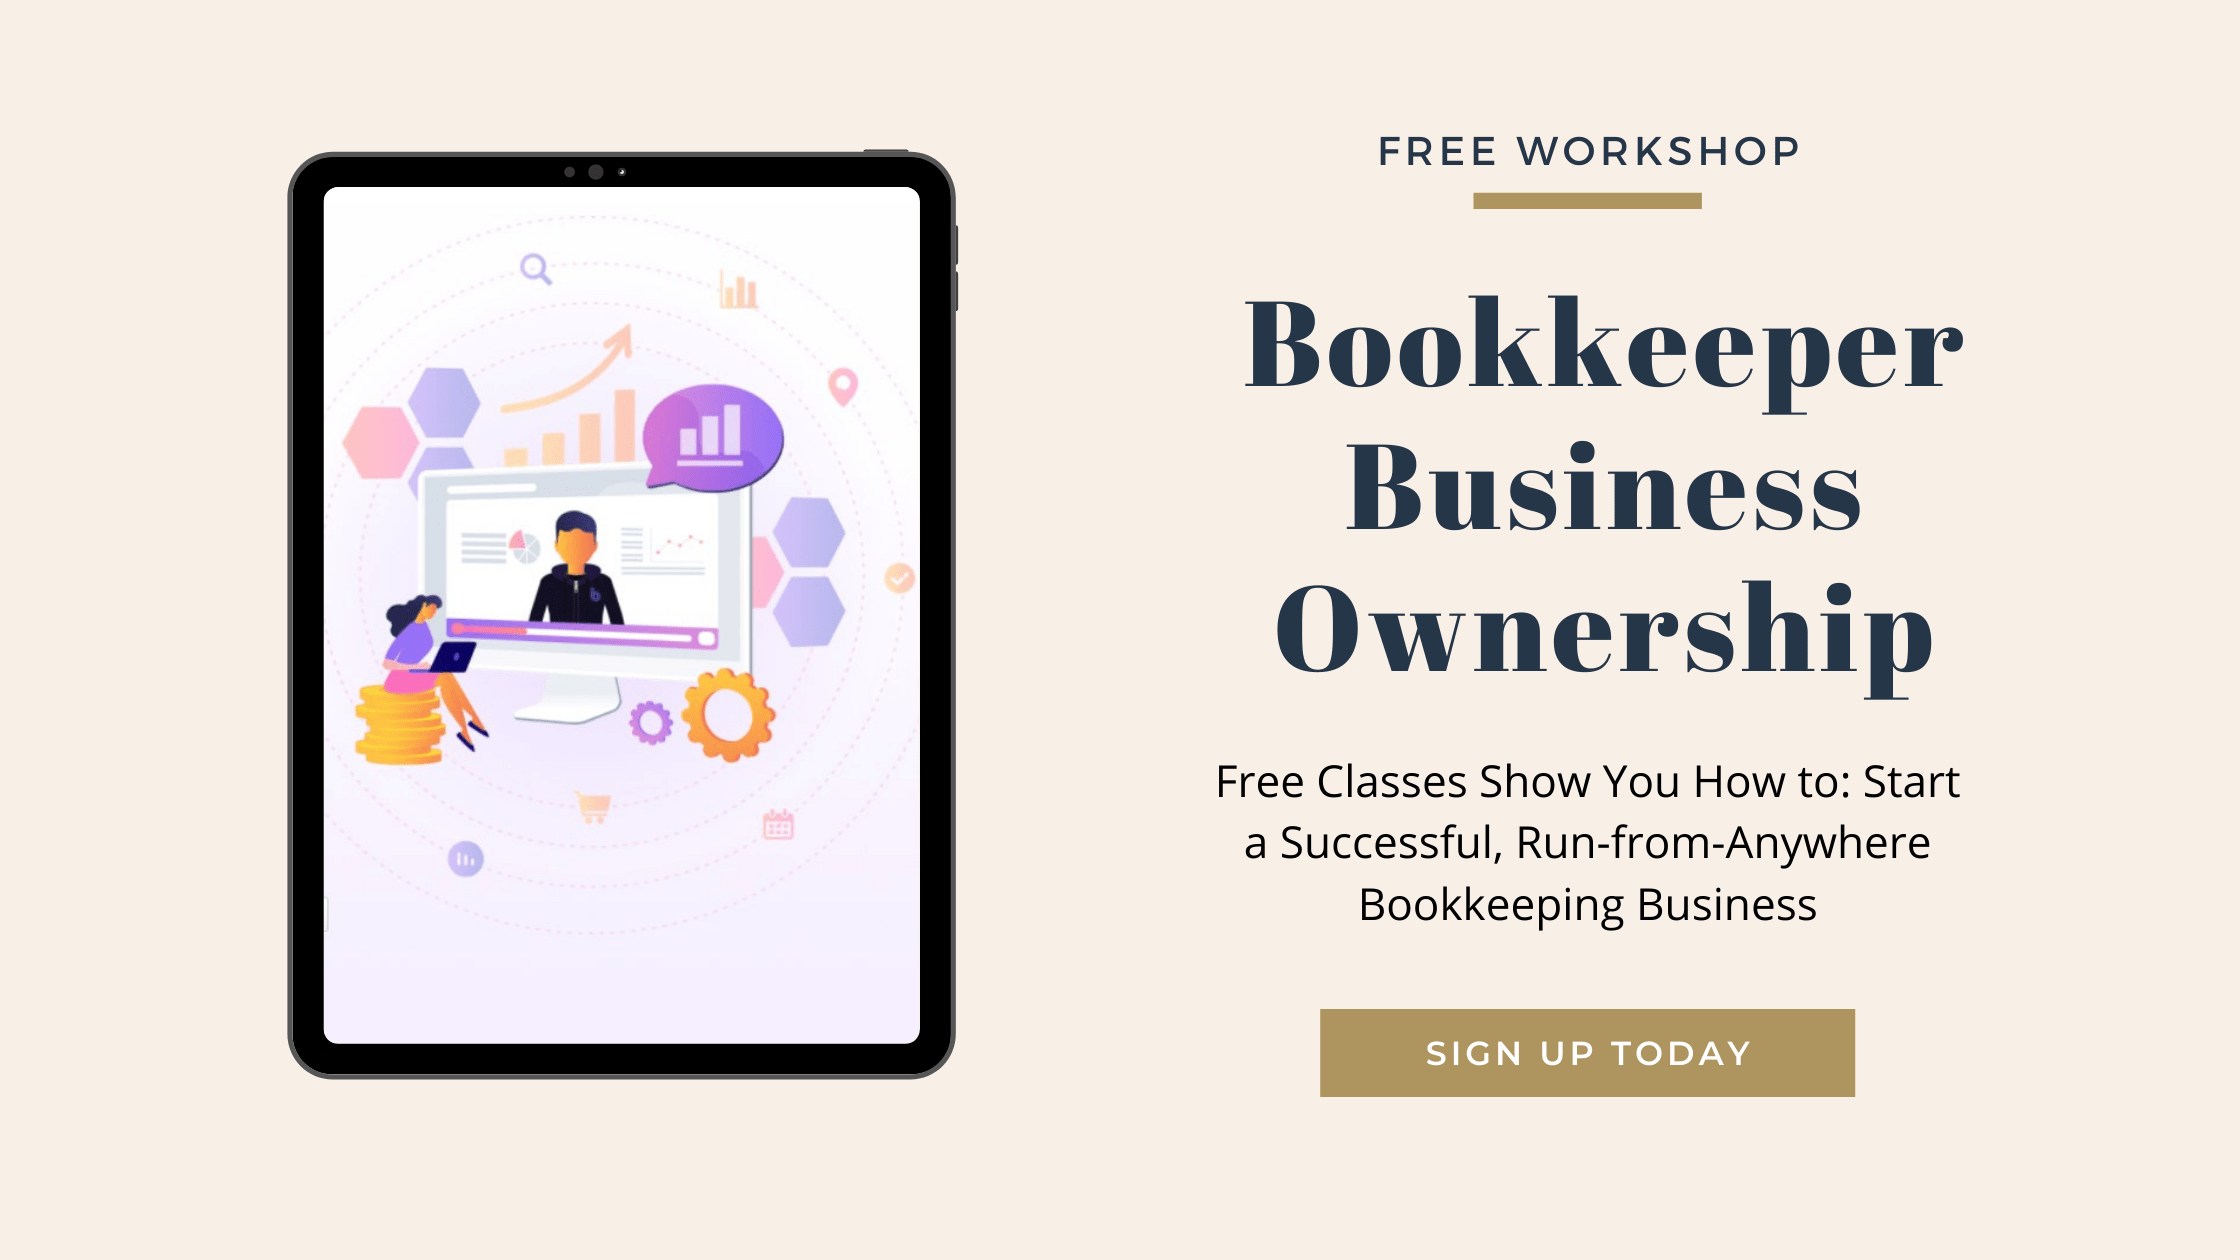 Start Your Own Bookkeeping Business